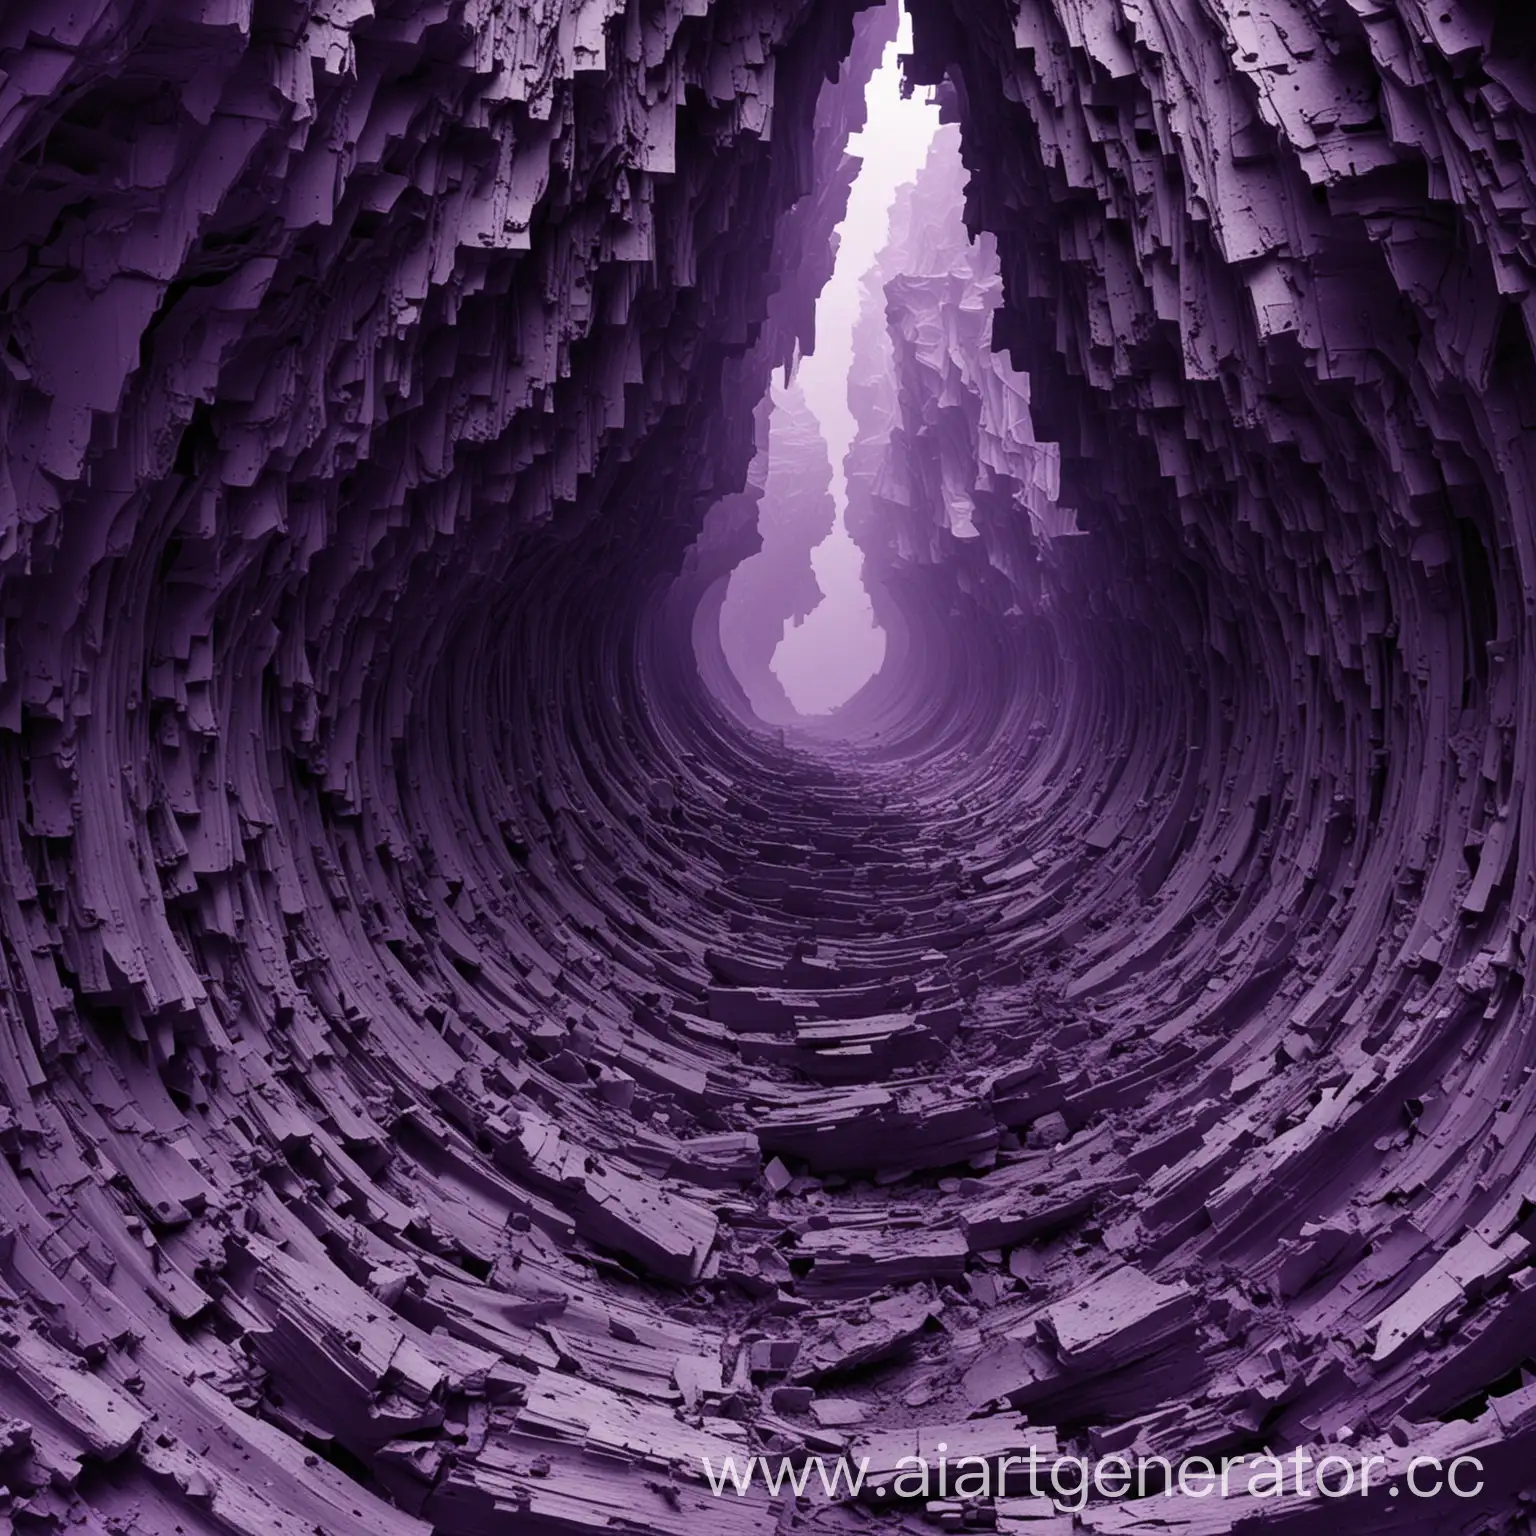 Abstract-Art-Collapse-in-Purple-Tones